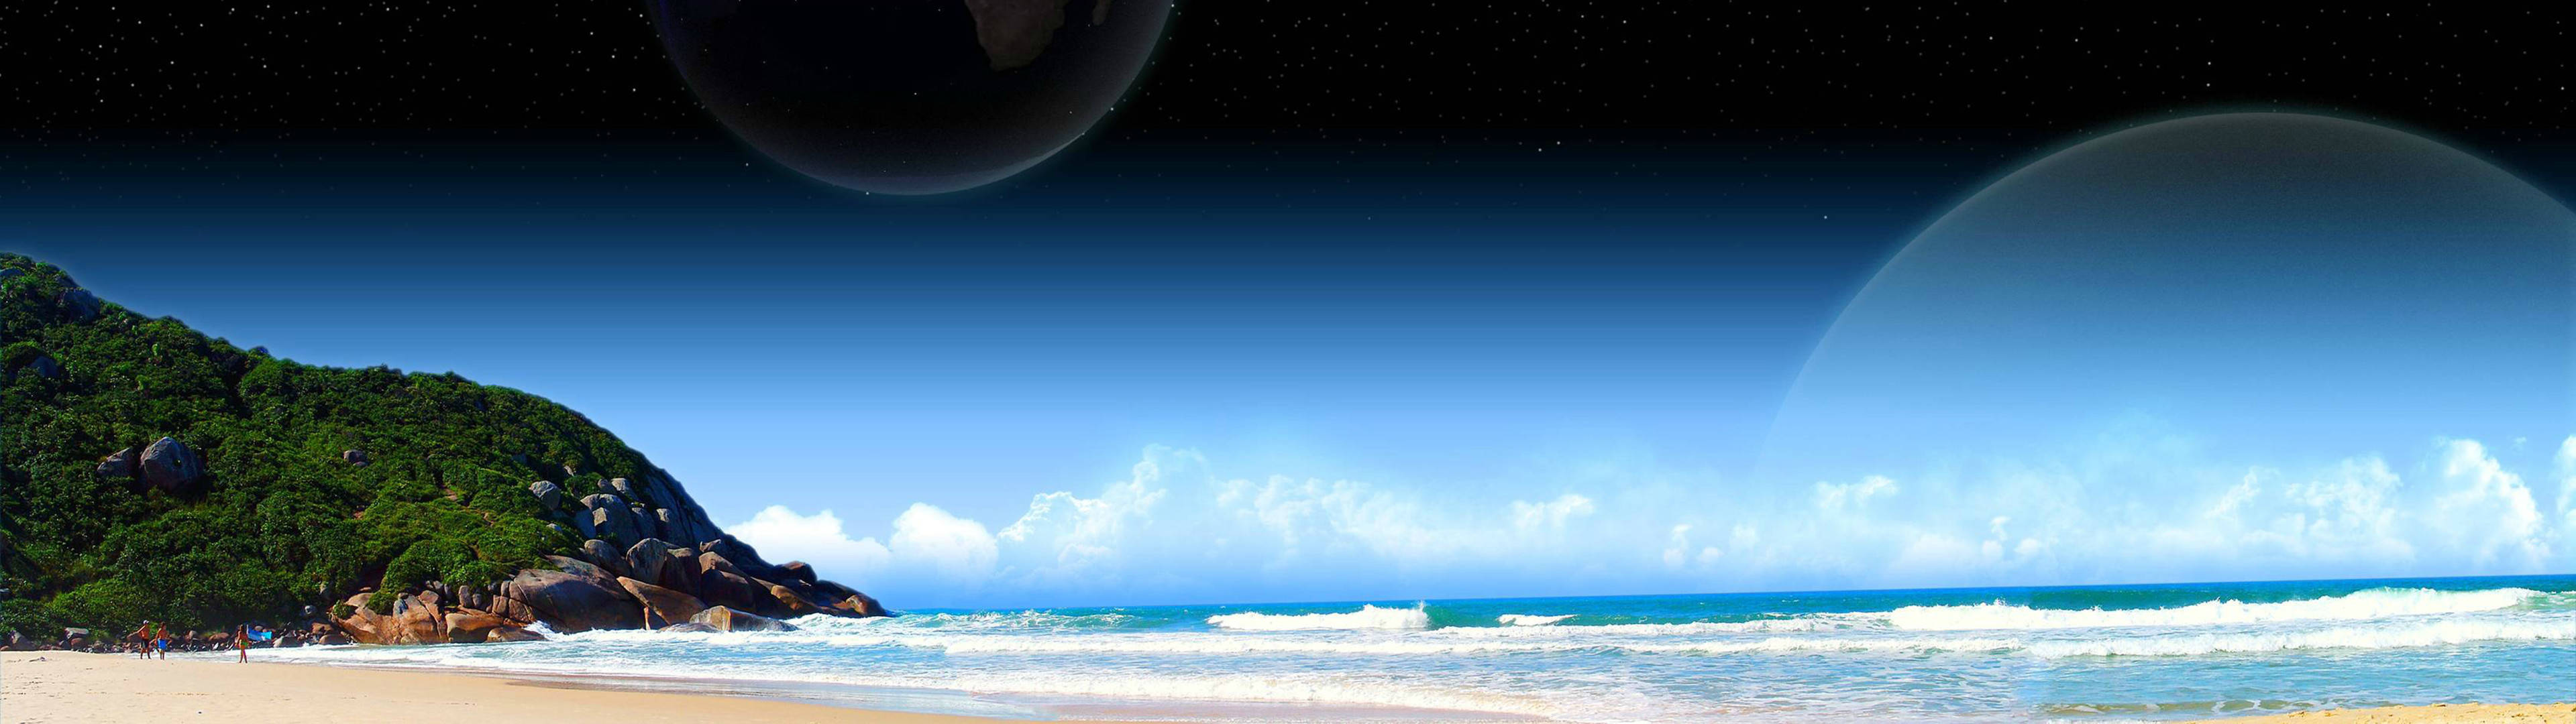 Captivating Dual Monitor Display Of Beach Skies Background